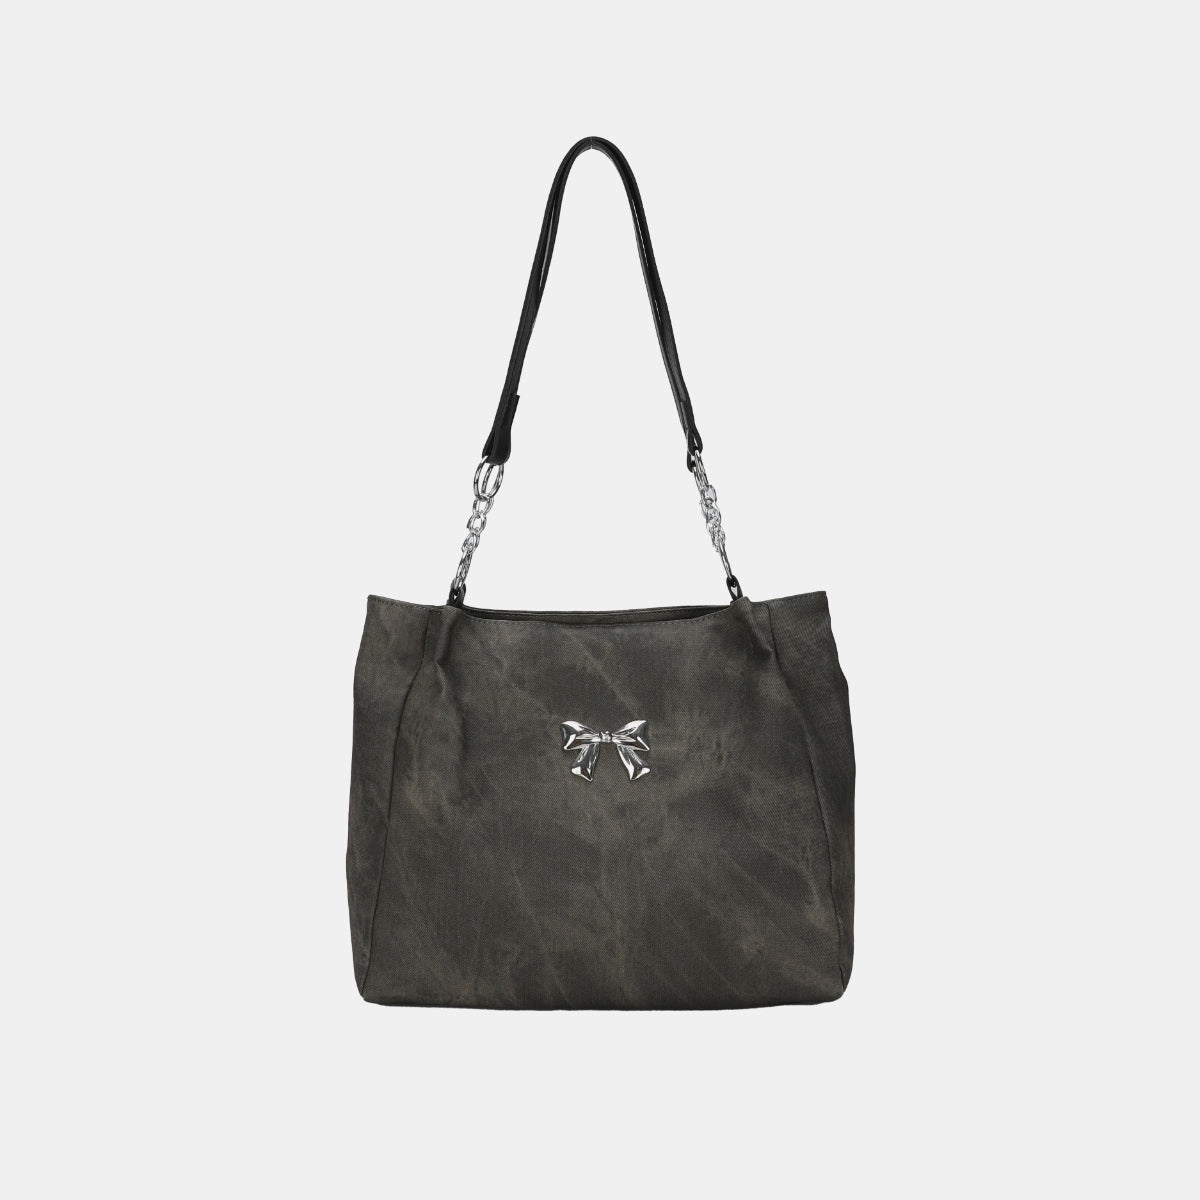 Elegant women's tote bag with a charming bow detail, available in camel, brown, gray, and blue, made from high-quality polyester.